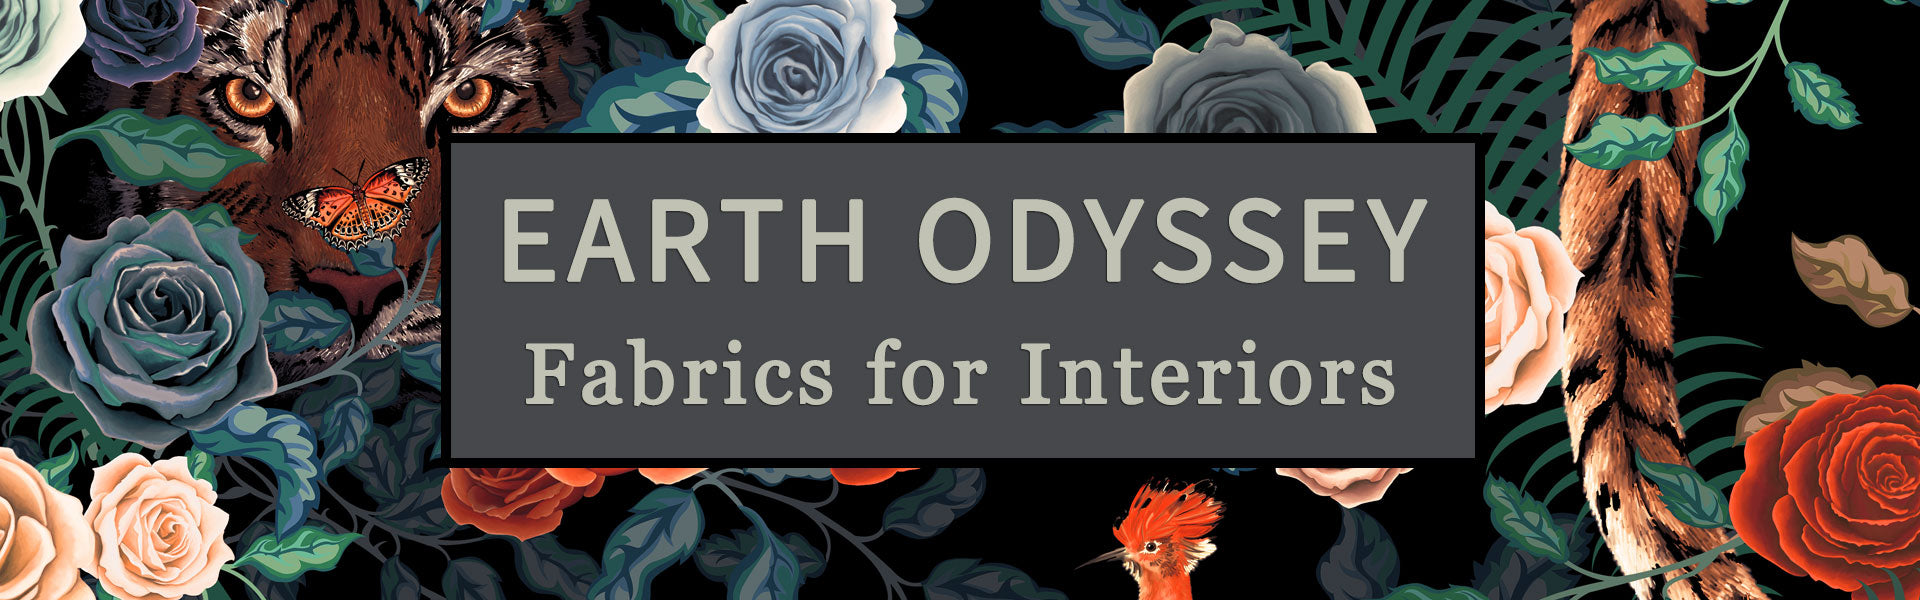 Designer Fabrics for Interiors, Earth Odyssey Collection for Upholstery, Curtains and Soft Furnishings by Becca Who